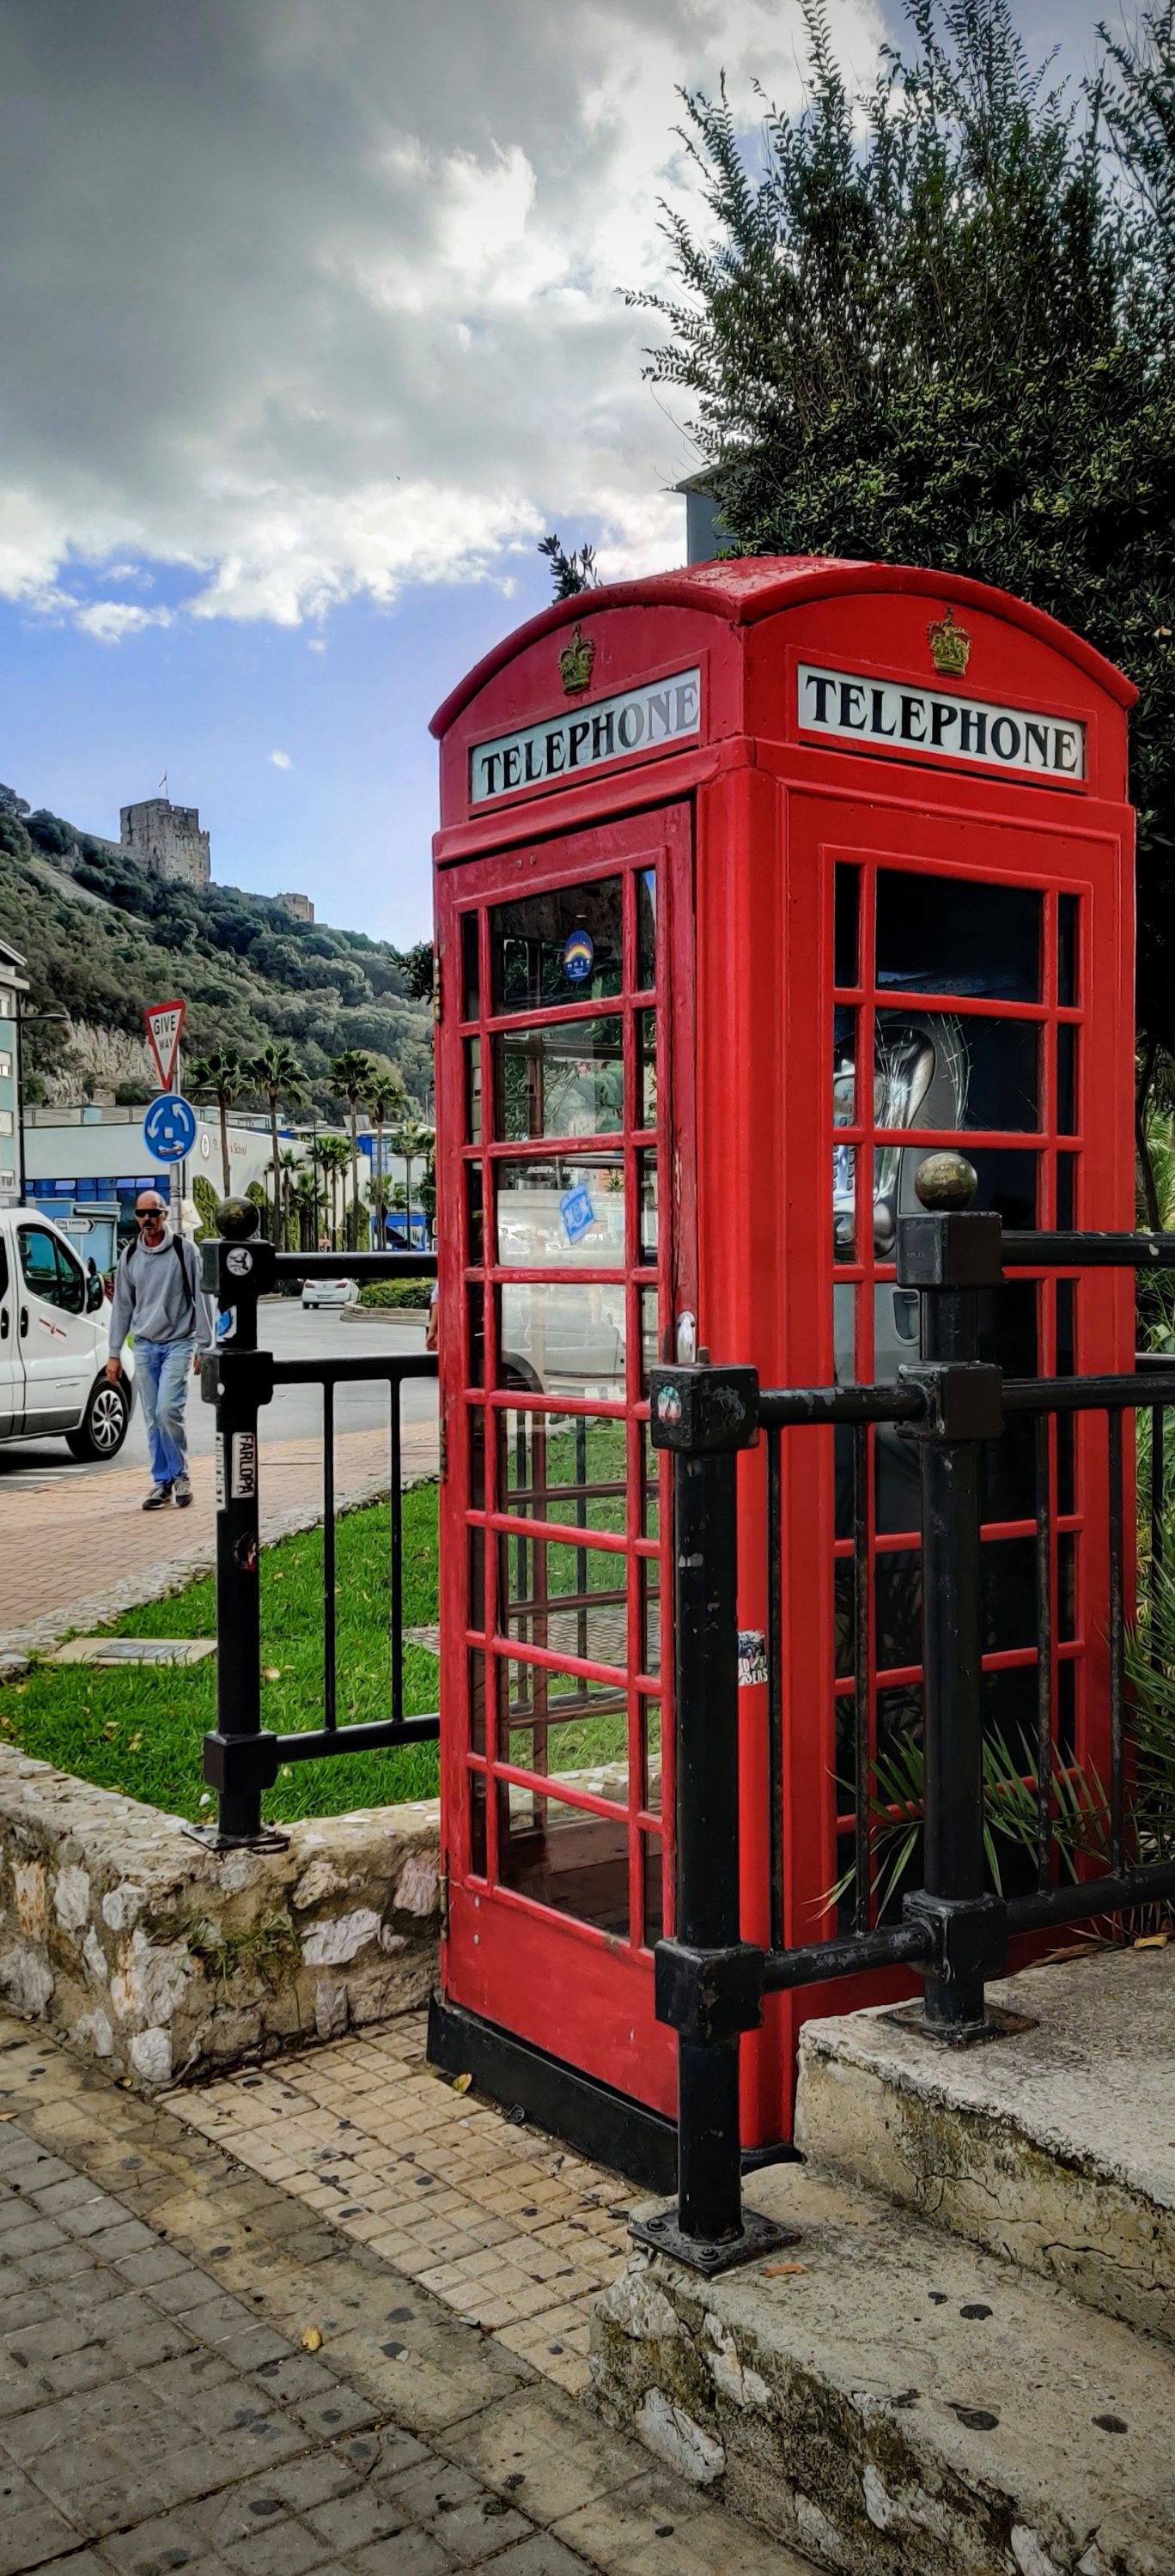 A British style red telephone booth